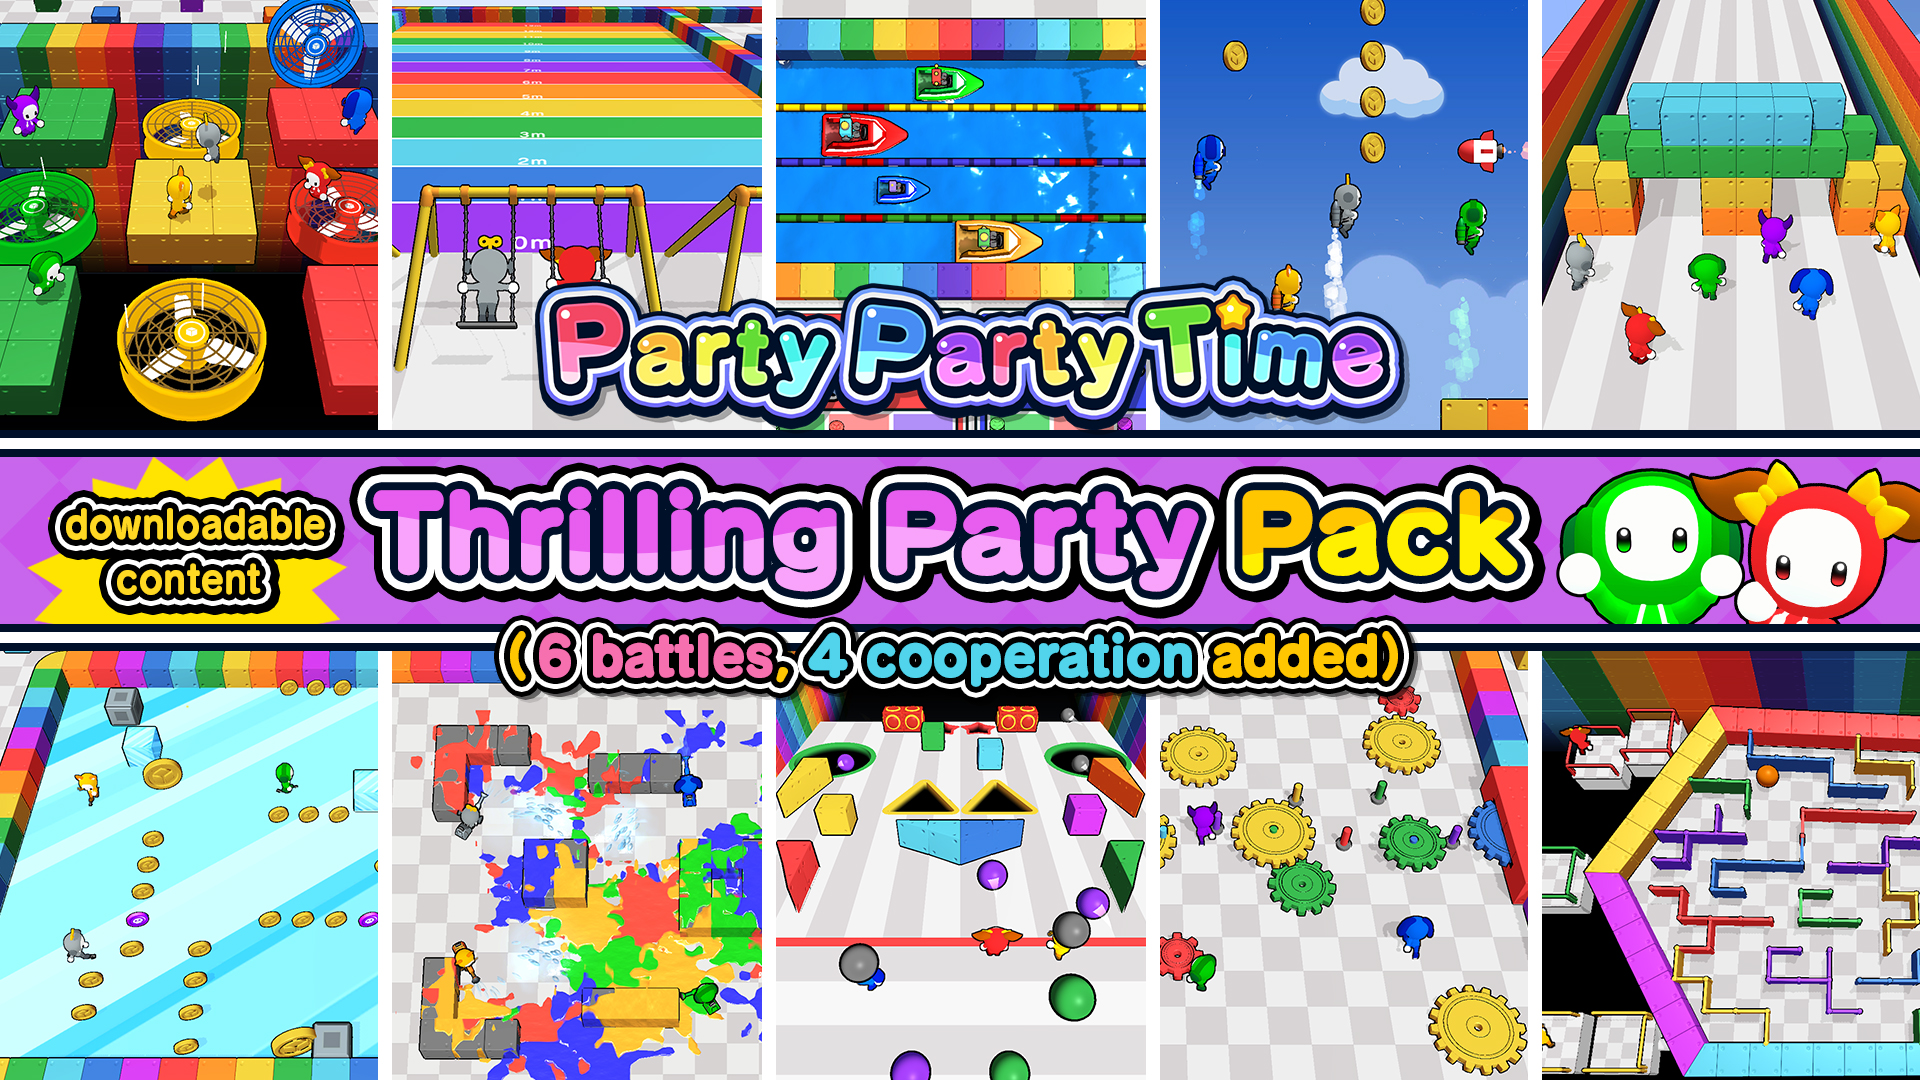 Thrilling Party Pack